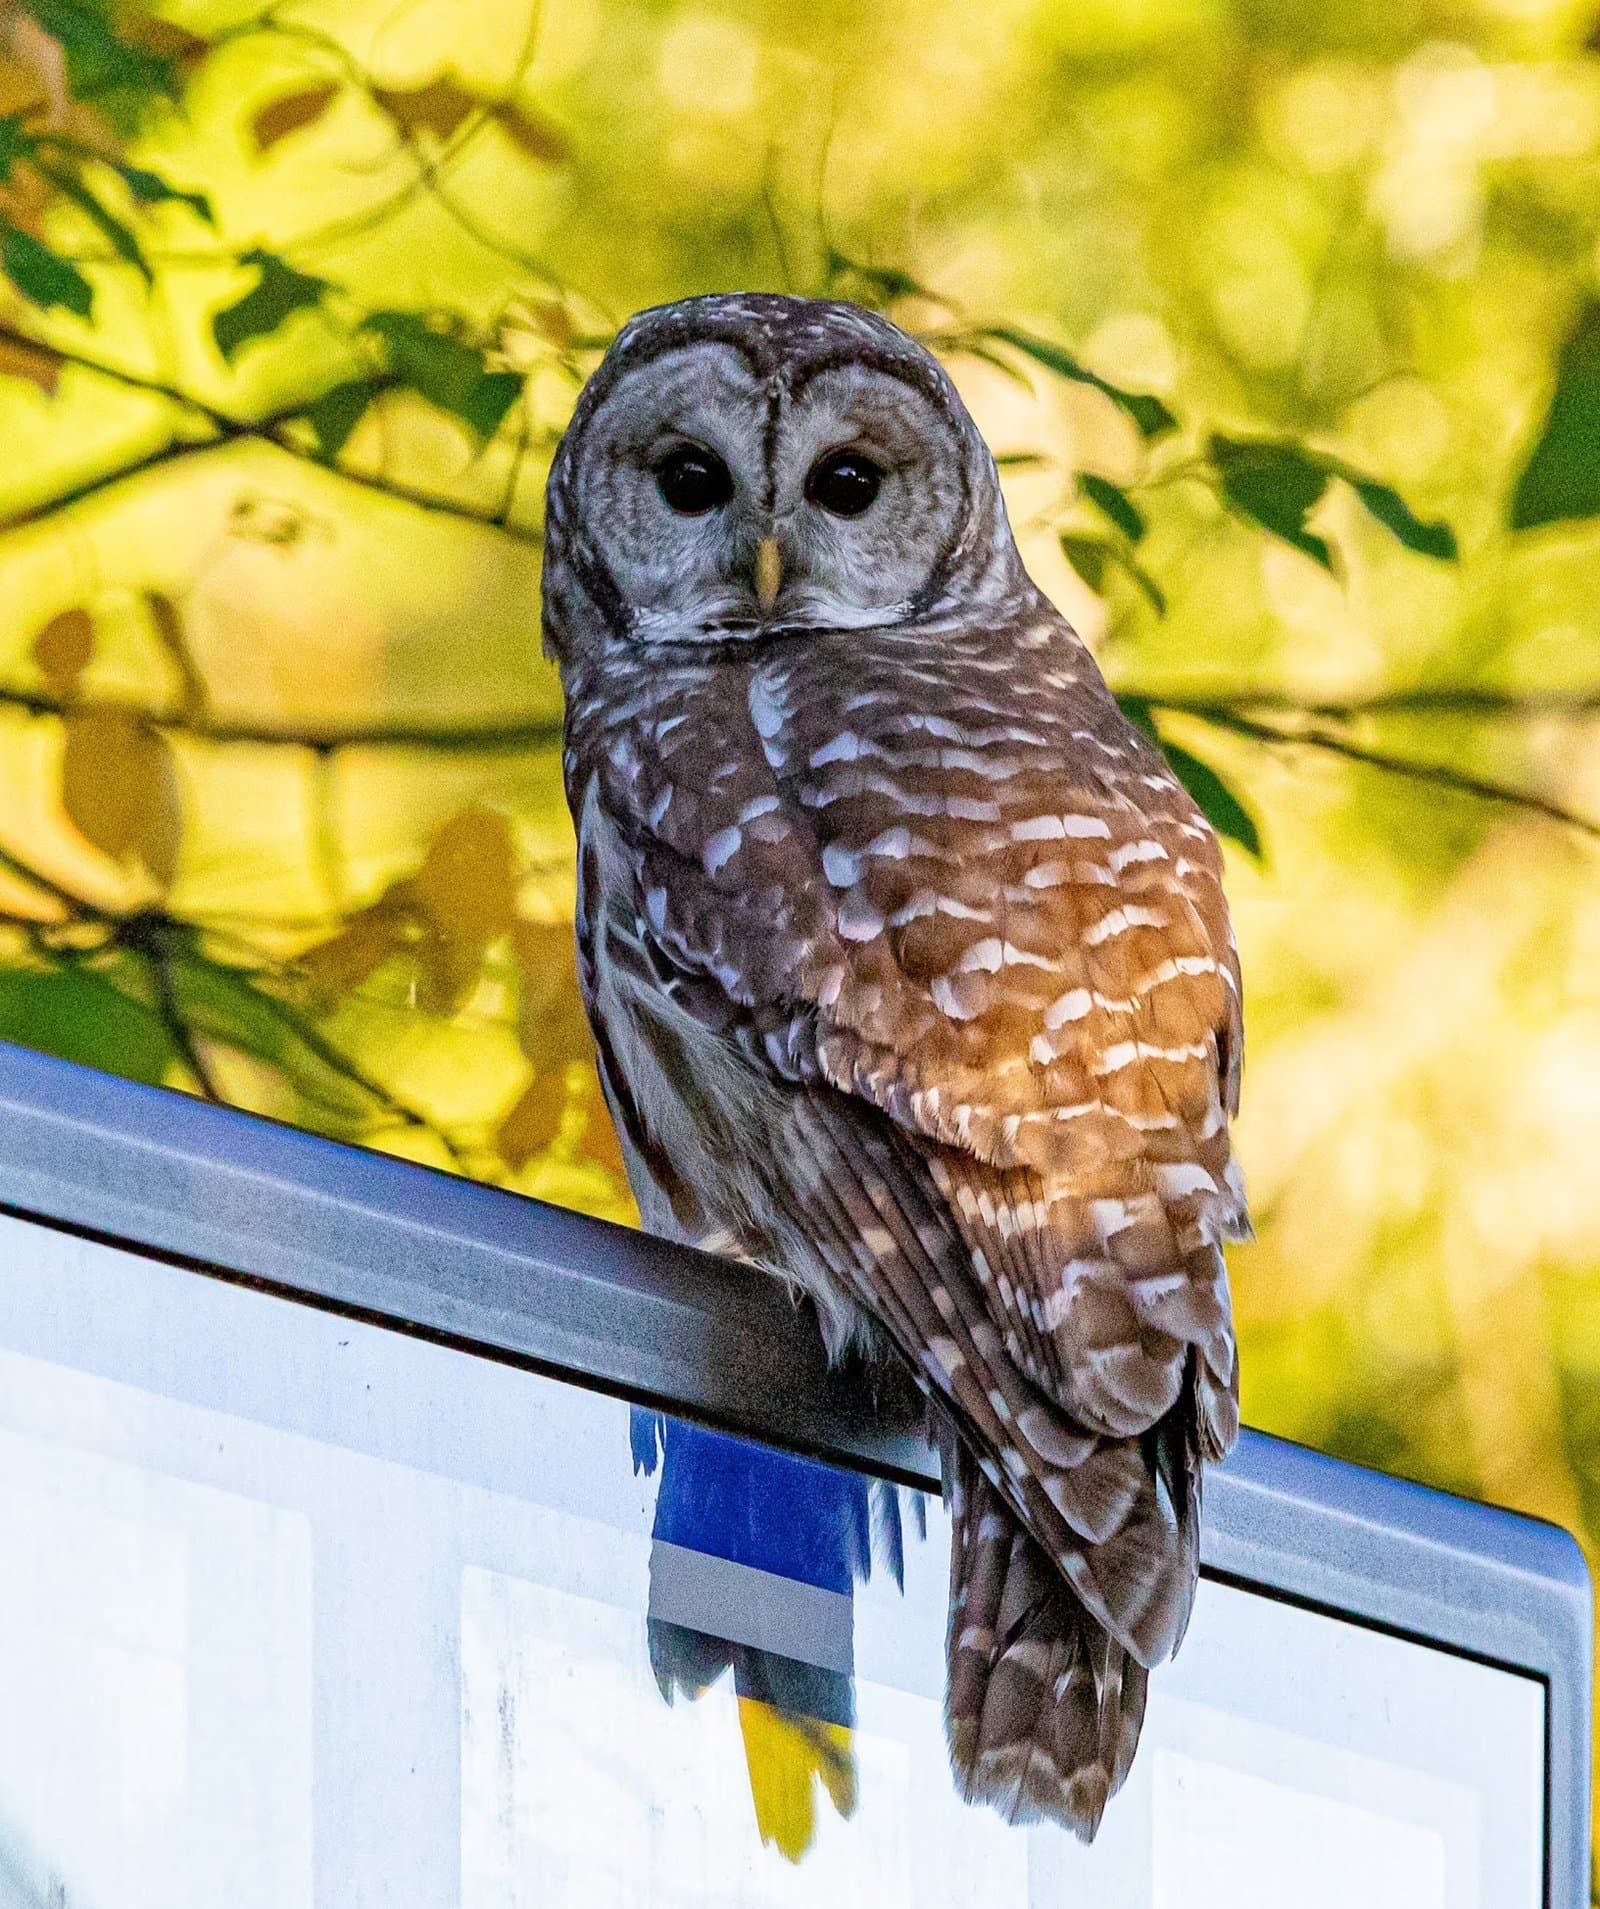 PHOTOS: Owl spotted in Northborough